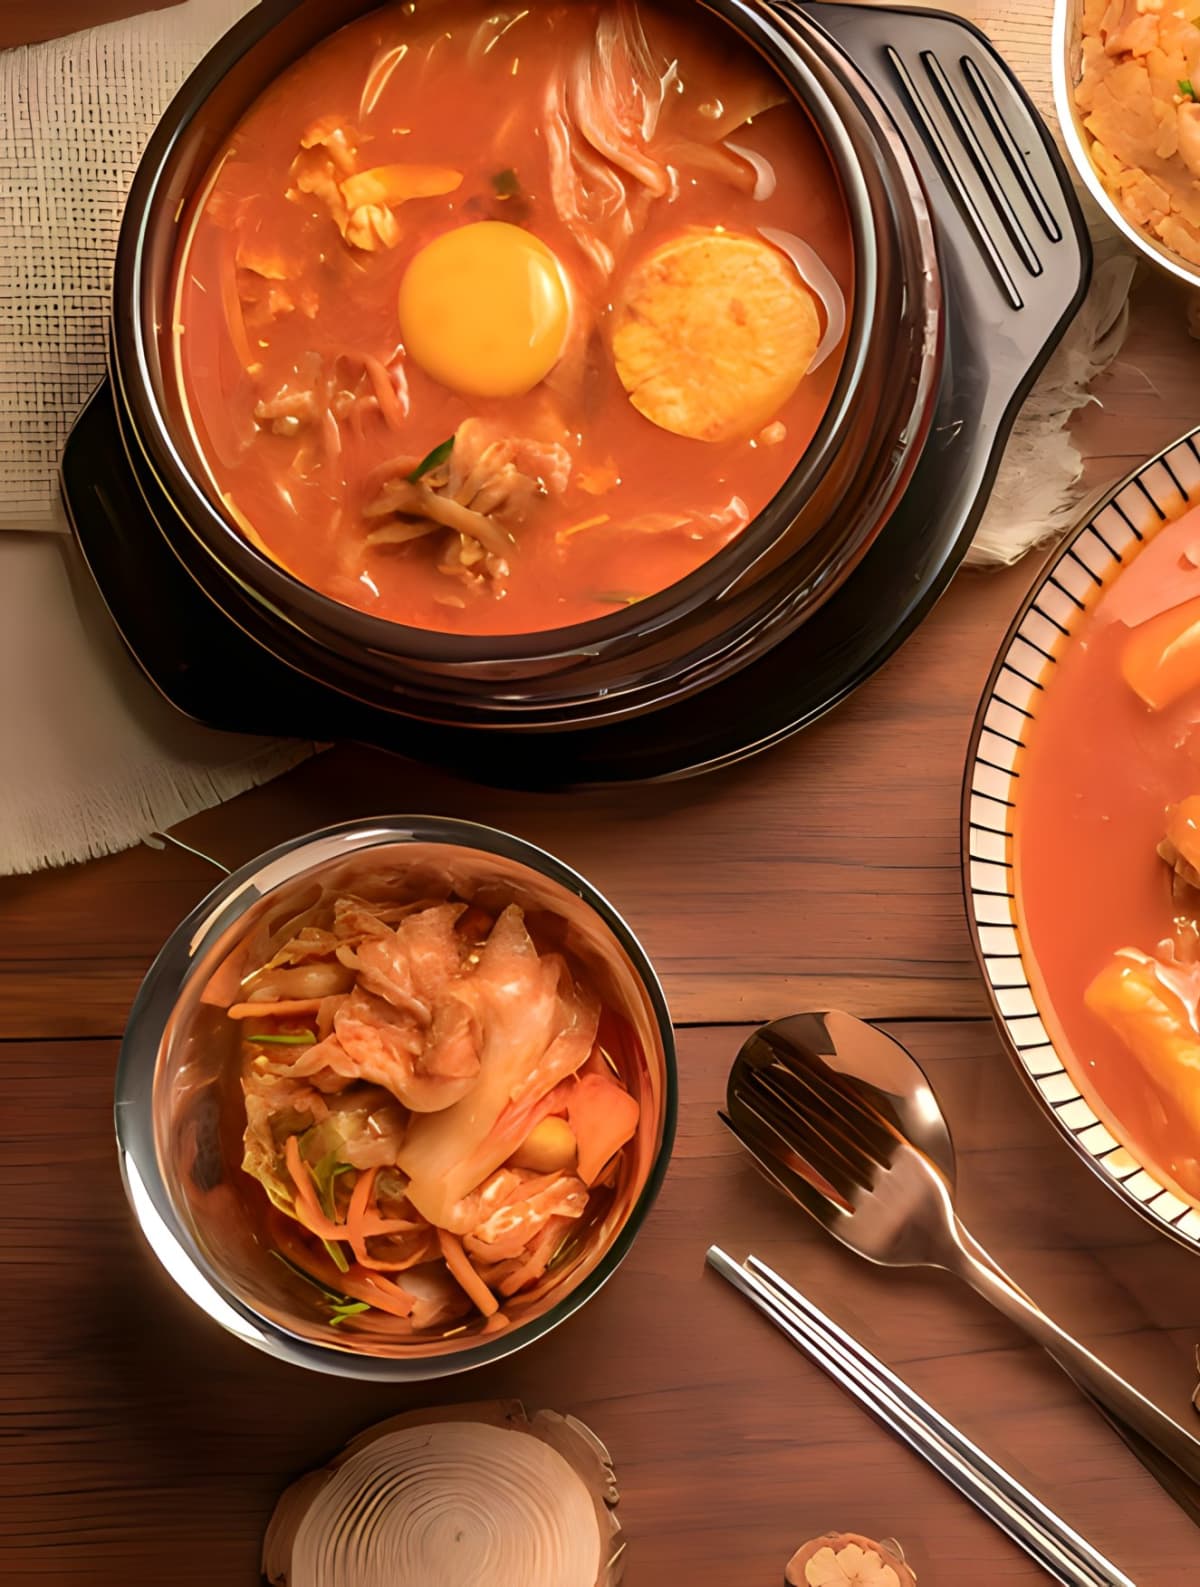 Kimchi stew with side dish on table